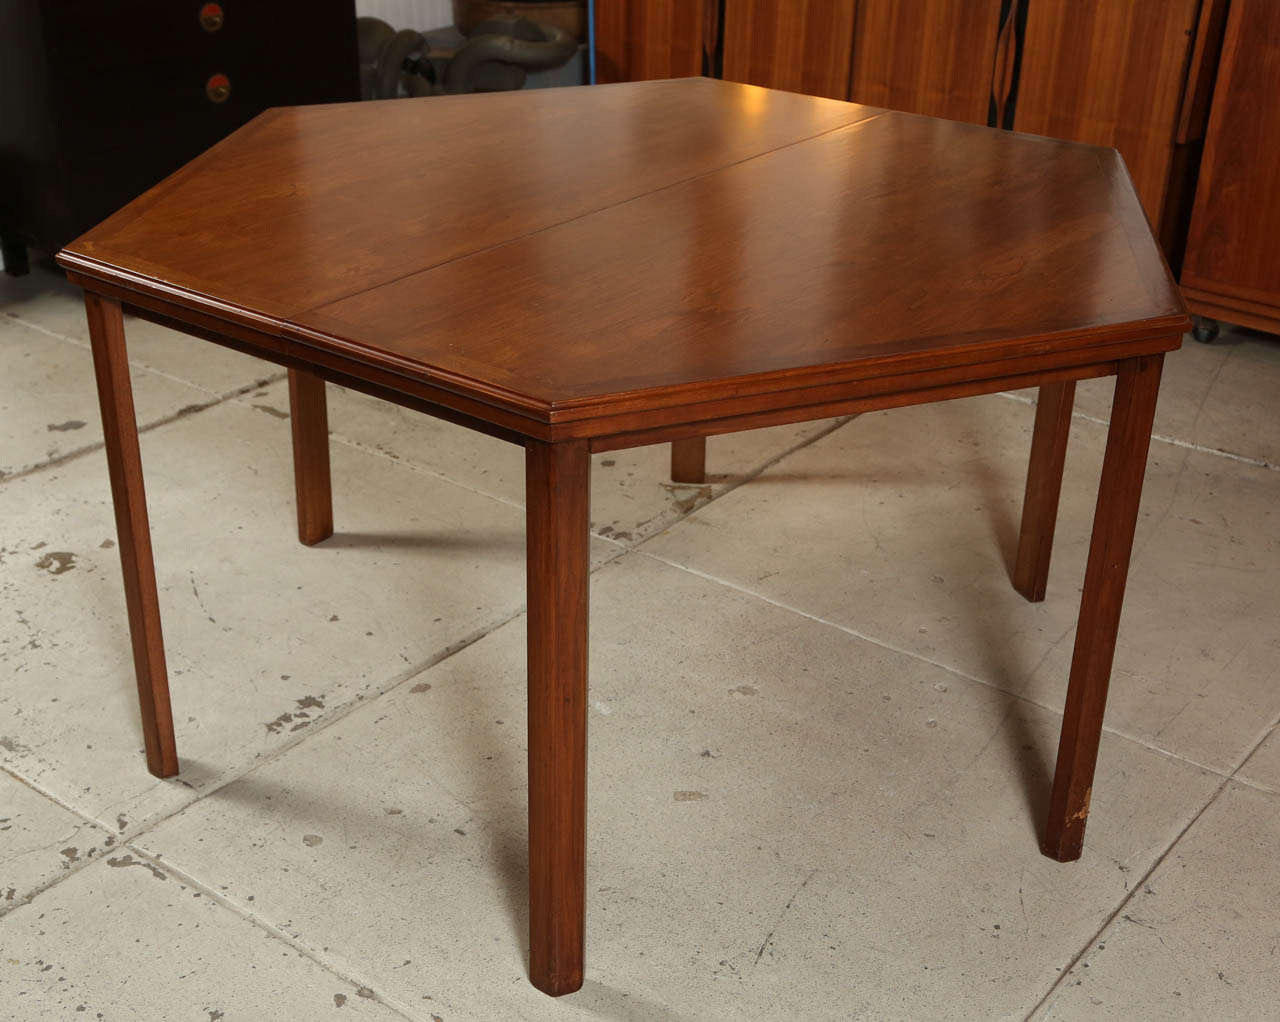 Custom hexagonal dining table with butterfly detail in walnut c.1962. Chairs are oil finished walnut with original woven fabric with lurex accents.